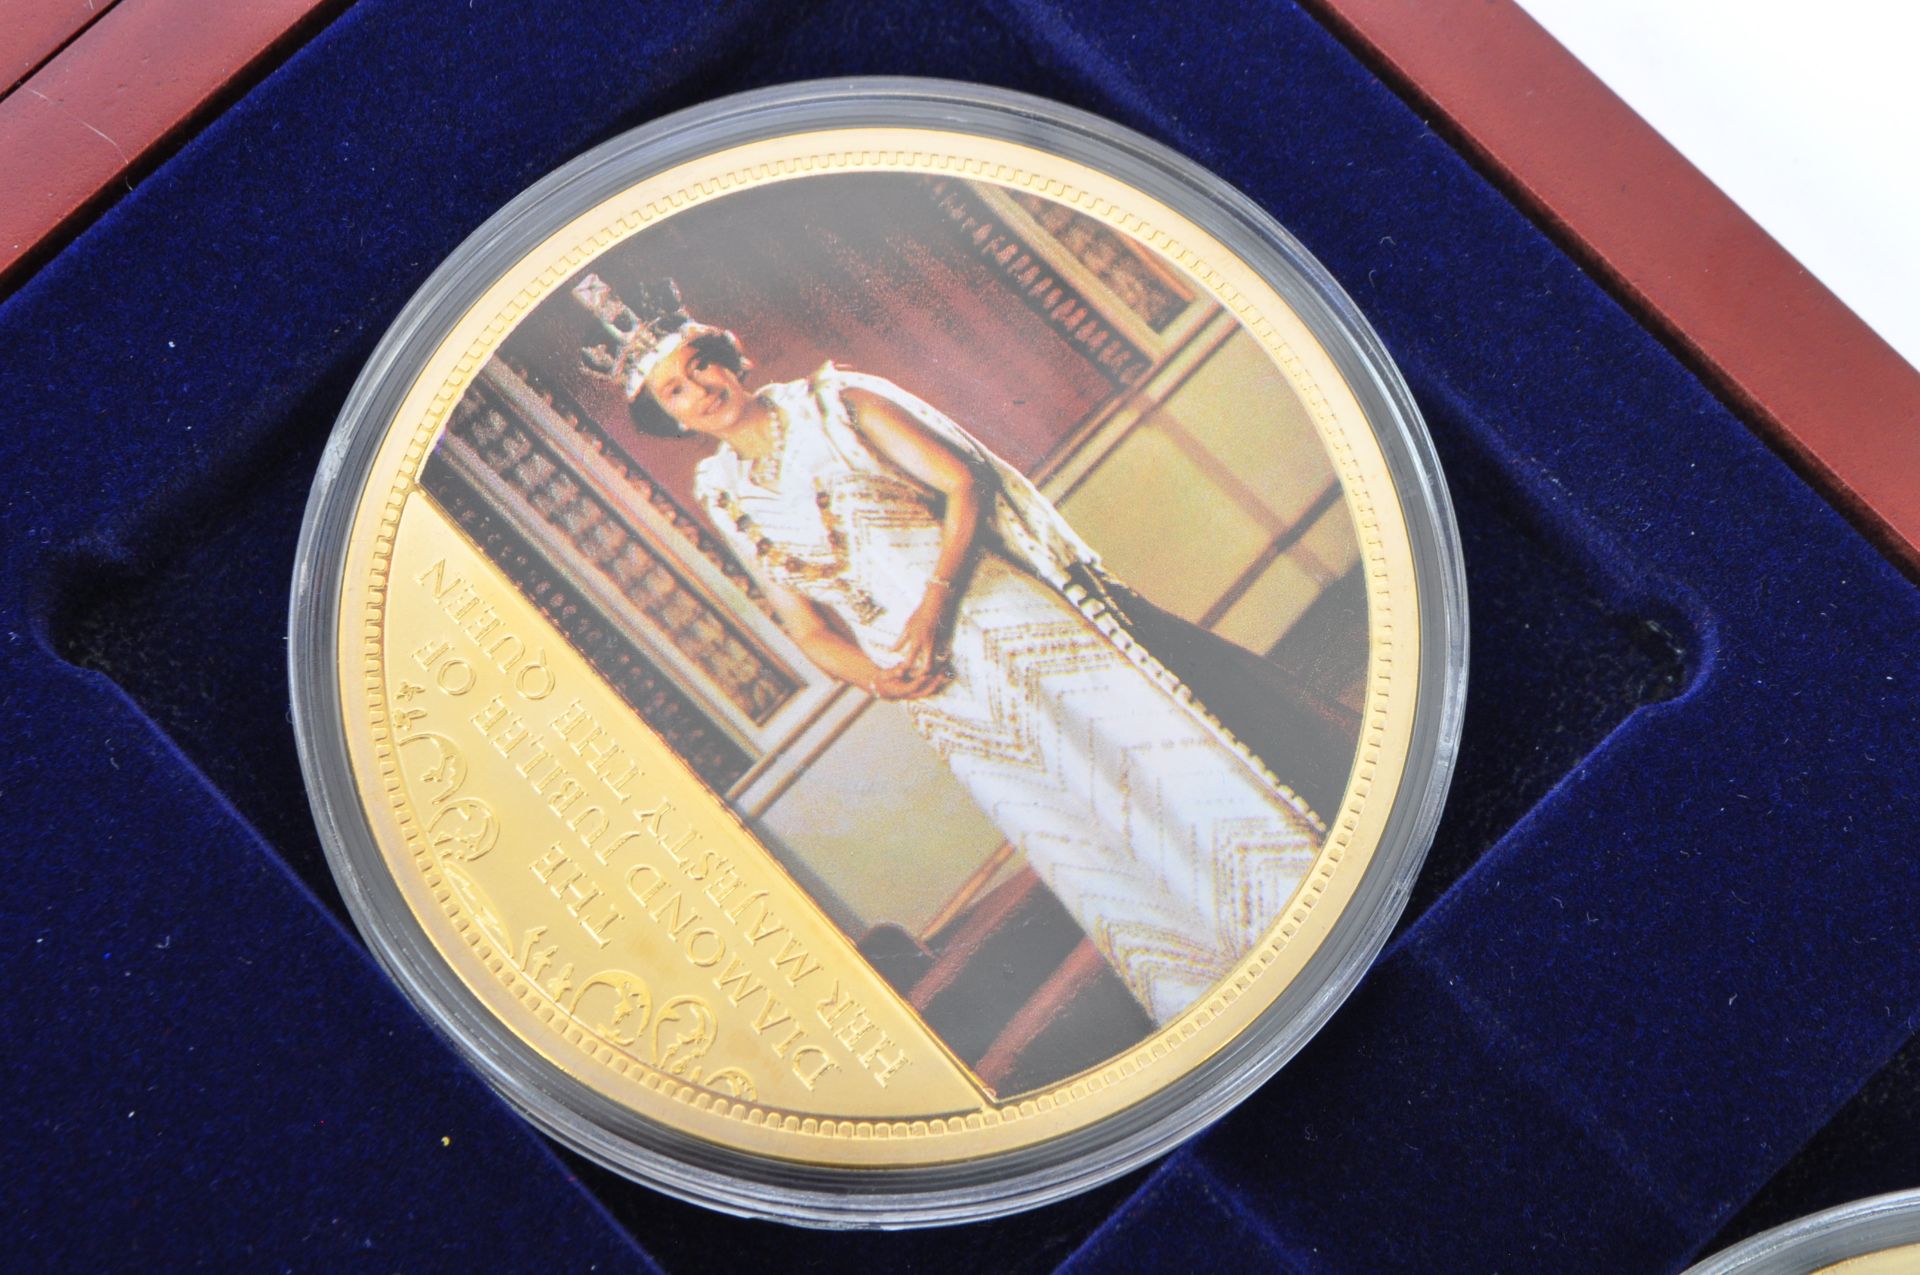 THE QUEEN DIAMOND JUBILEE GIFT PACK OF COMMEMORATIVE COINS - Image 4 of 6